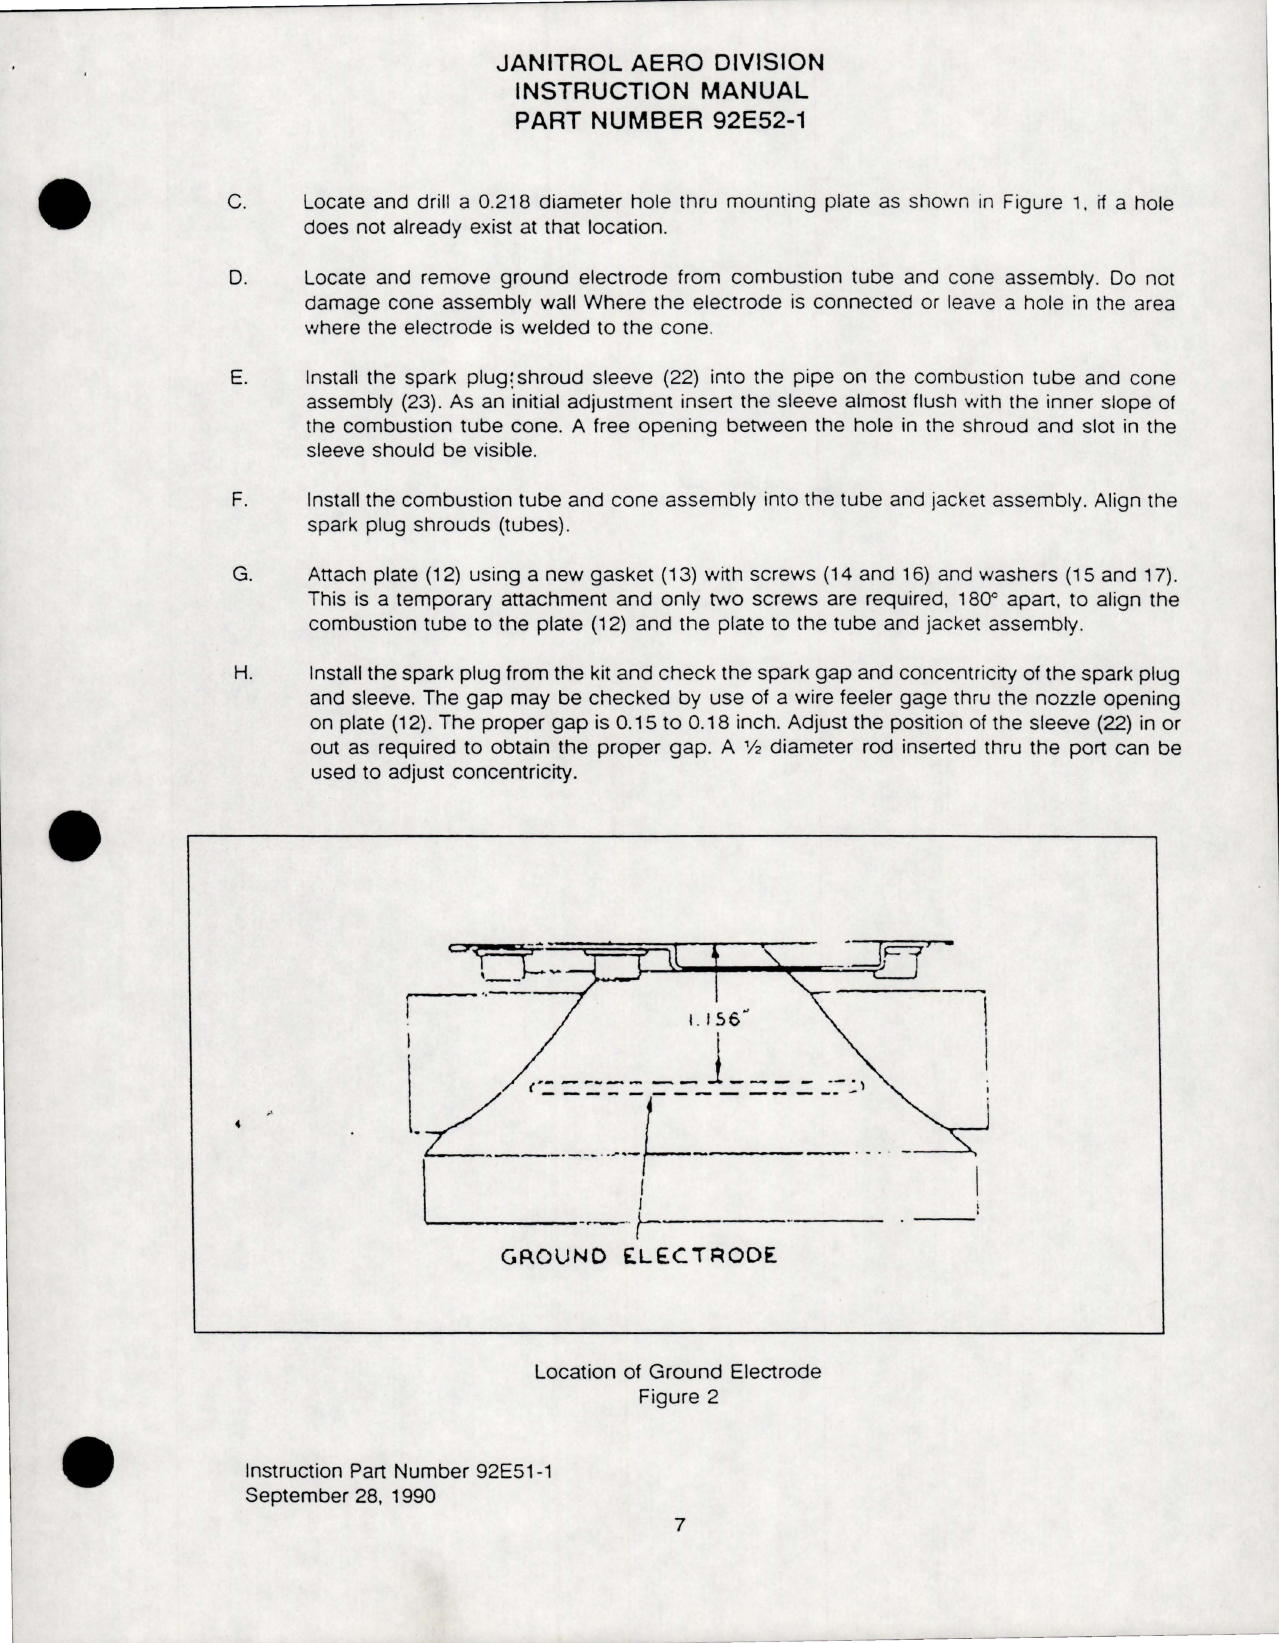 Sample page 7 from AirCorps Library document: Modification Instructions for Heater Modification Kit - Part 92E52-1 